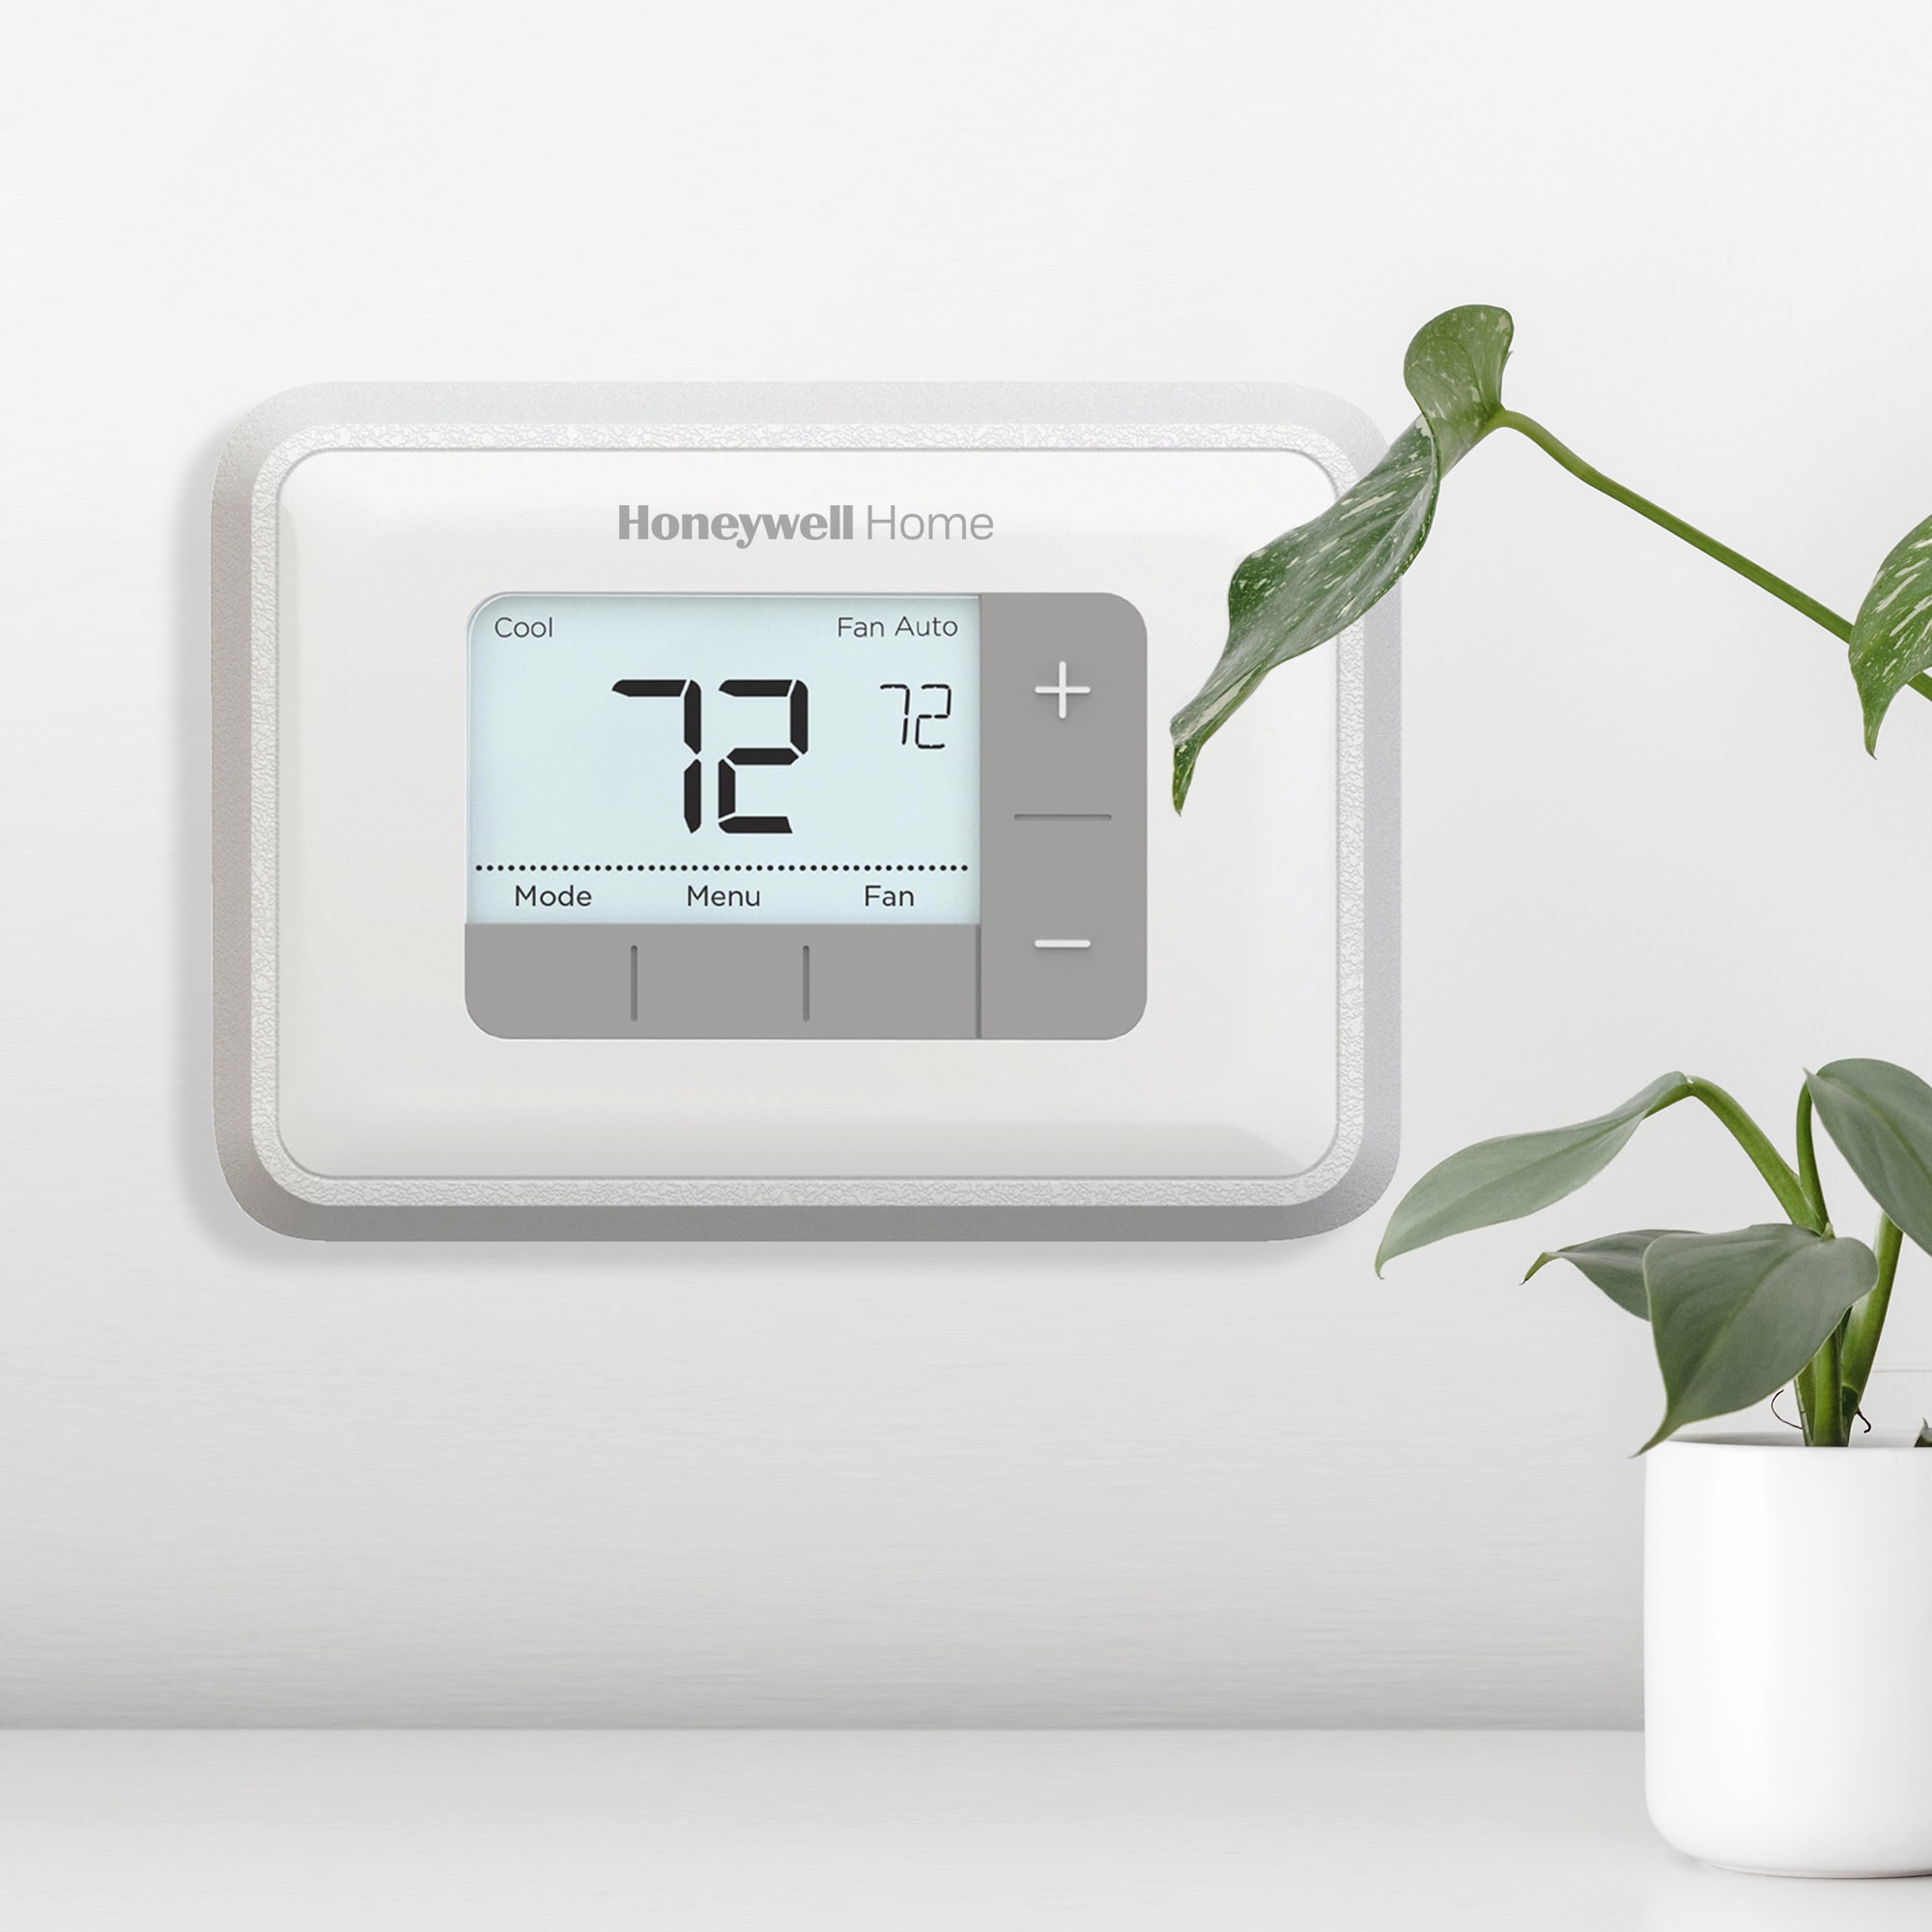 Honeywell Home RTH6360D 24-Volt 5-2 Day Programmable Thermostat in